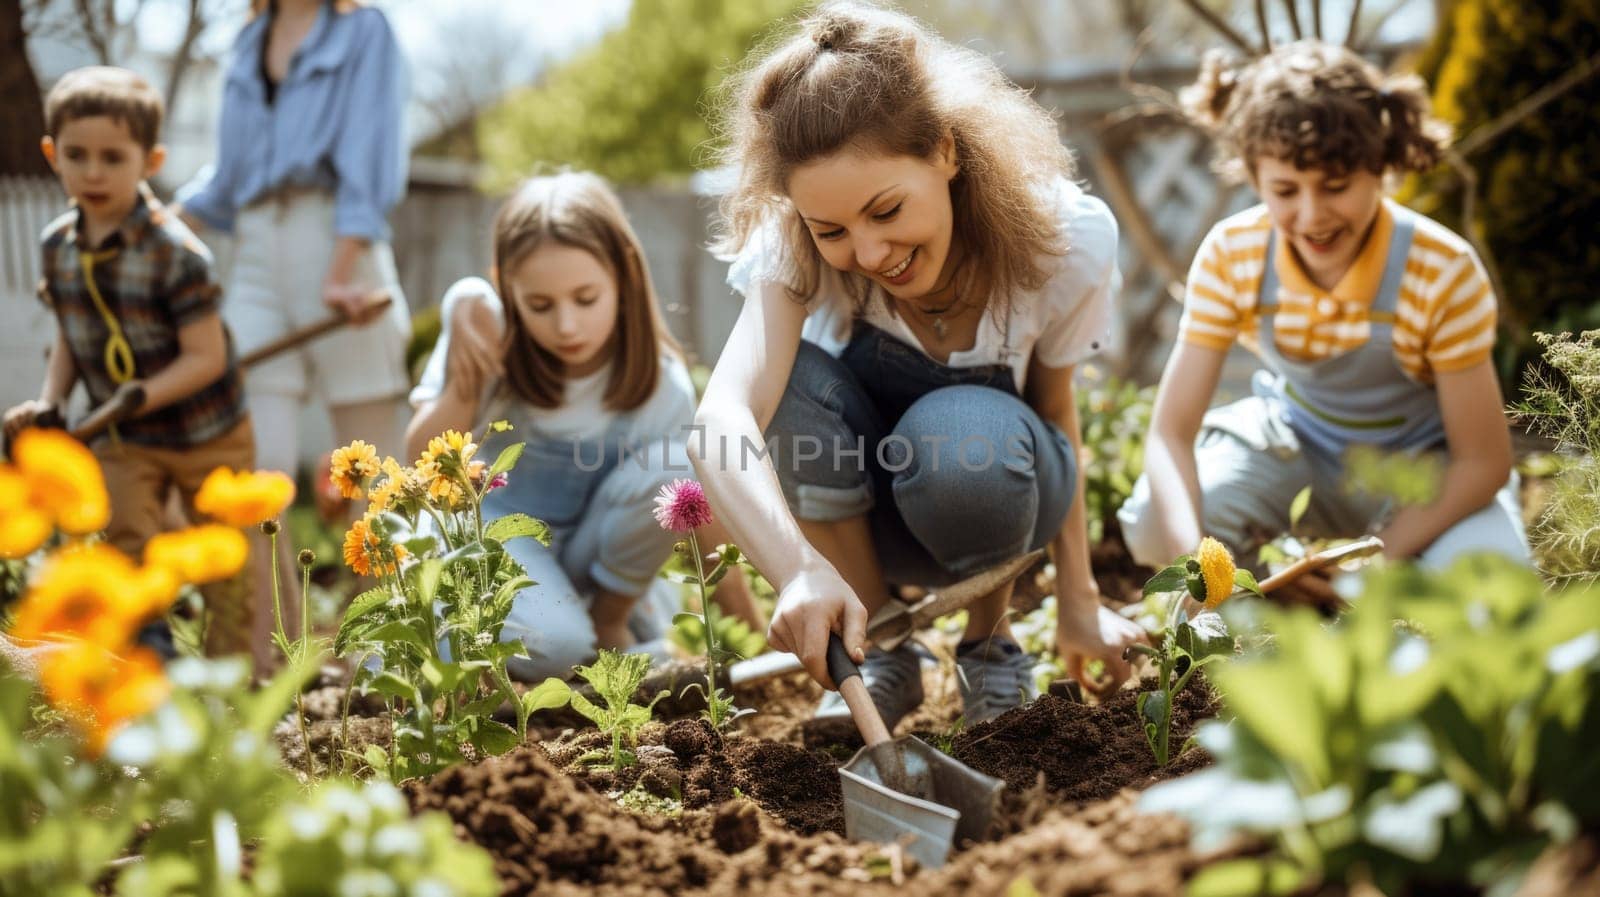 A family is picking flowers in a garden AIG41 by biancoblue